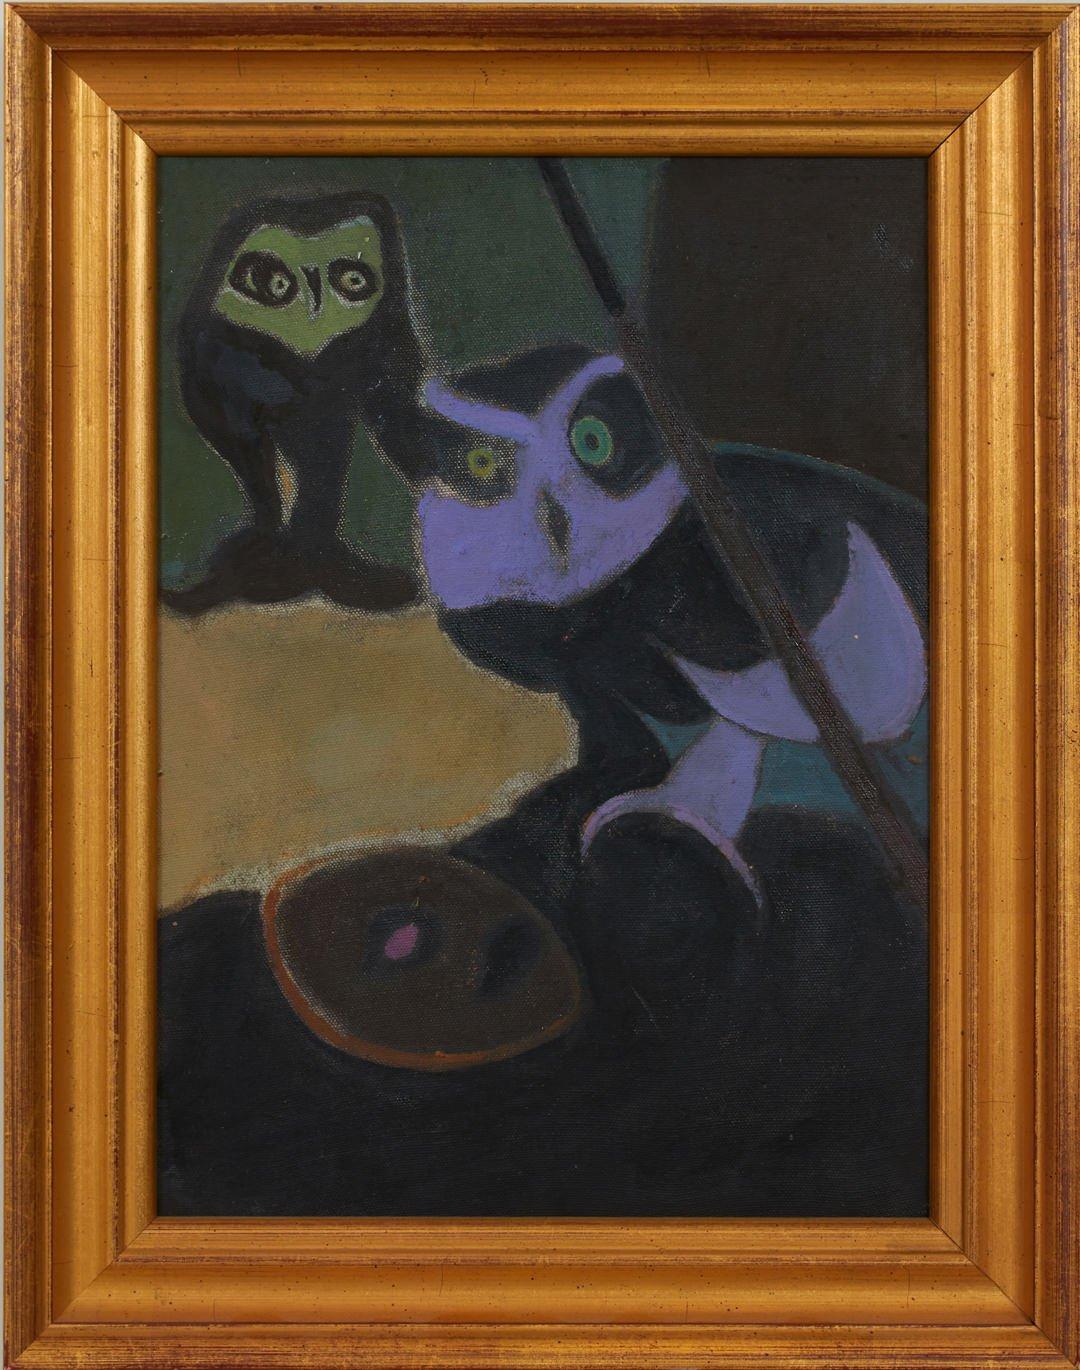 Two Owls, 20th Century Purple & Green Owls - Painting by Joseph O'Sickey